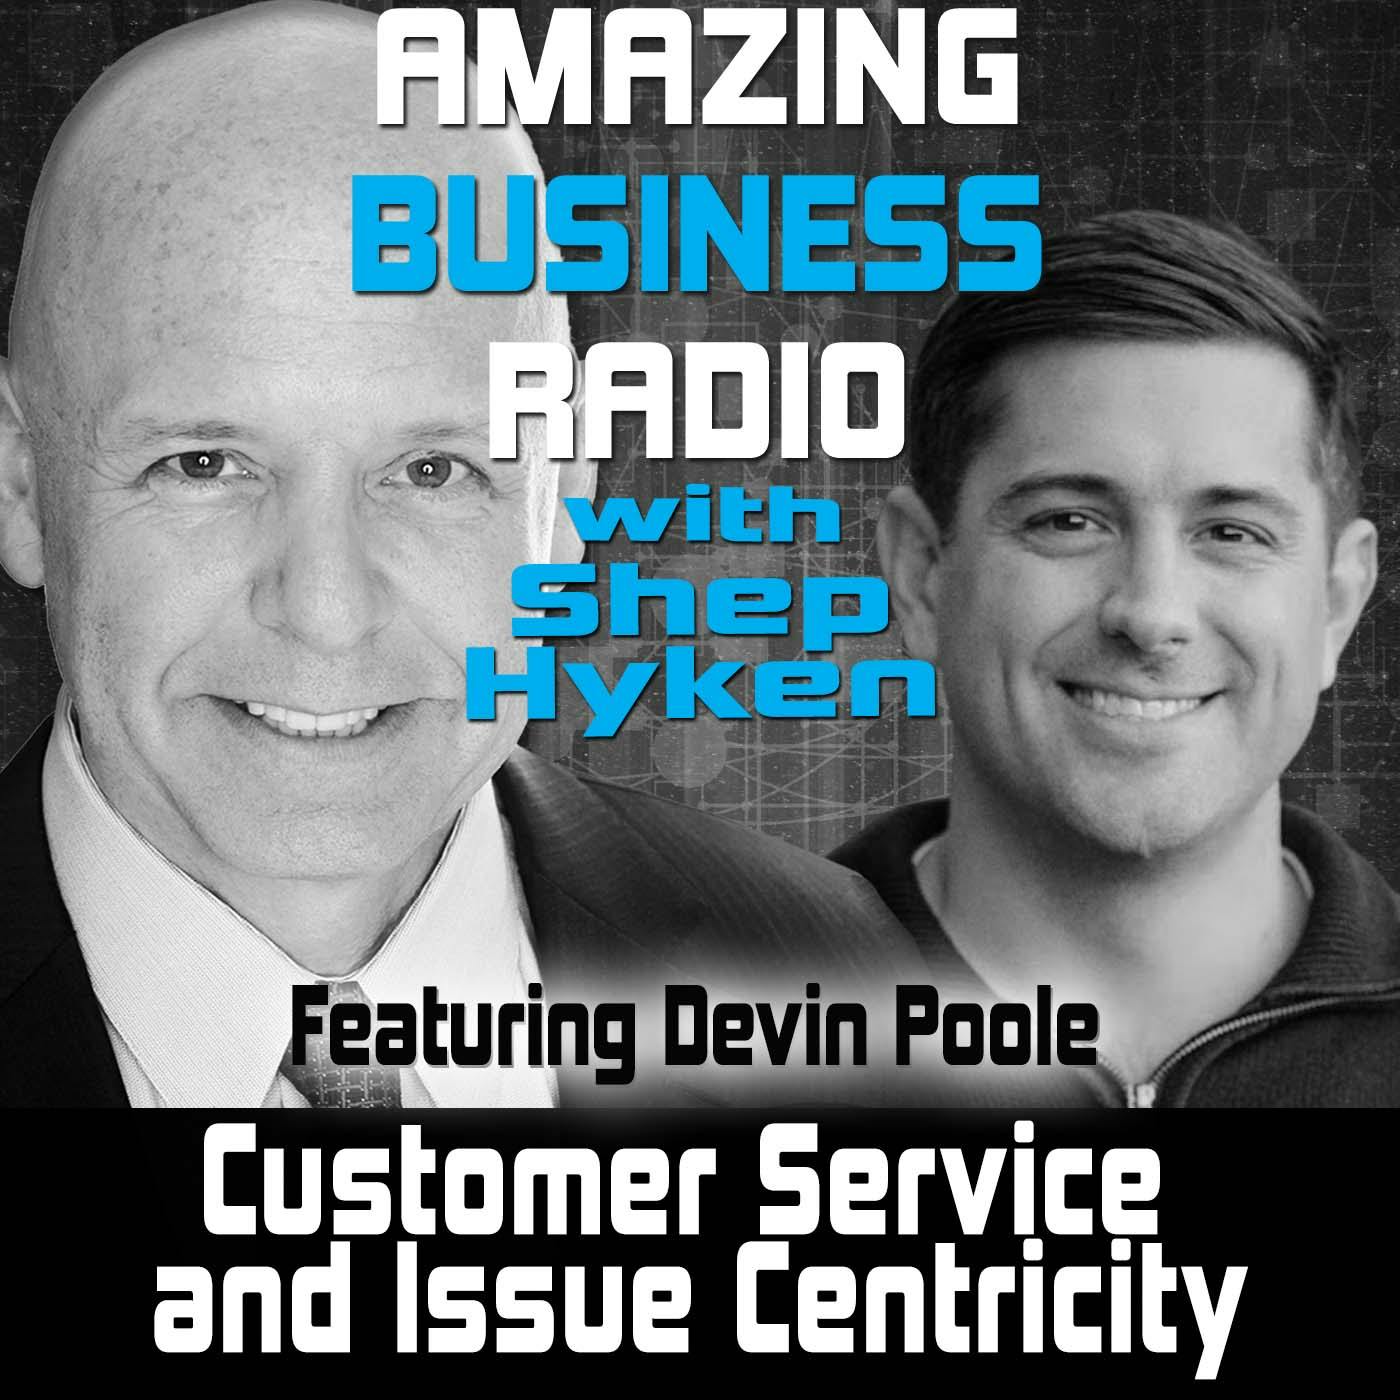 Customer Service and Issue Centricity Featuring Devin Poole